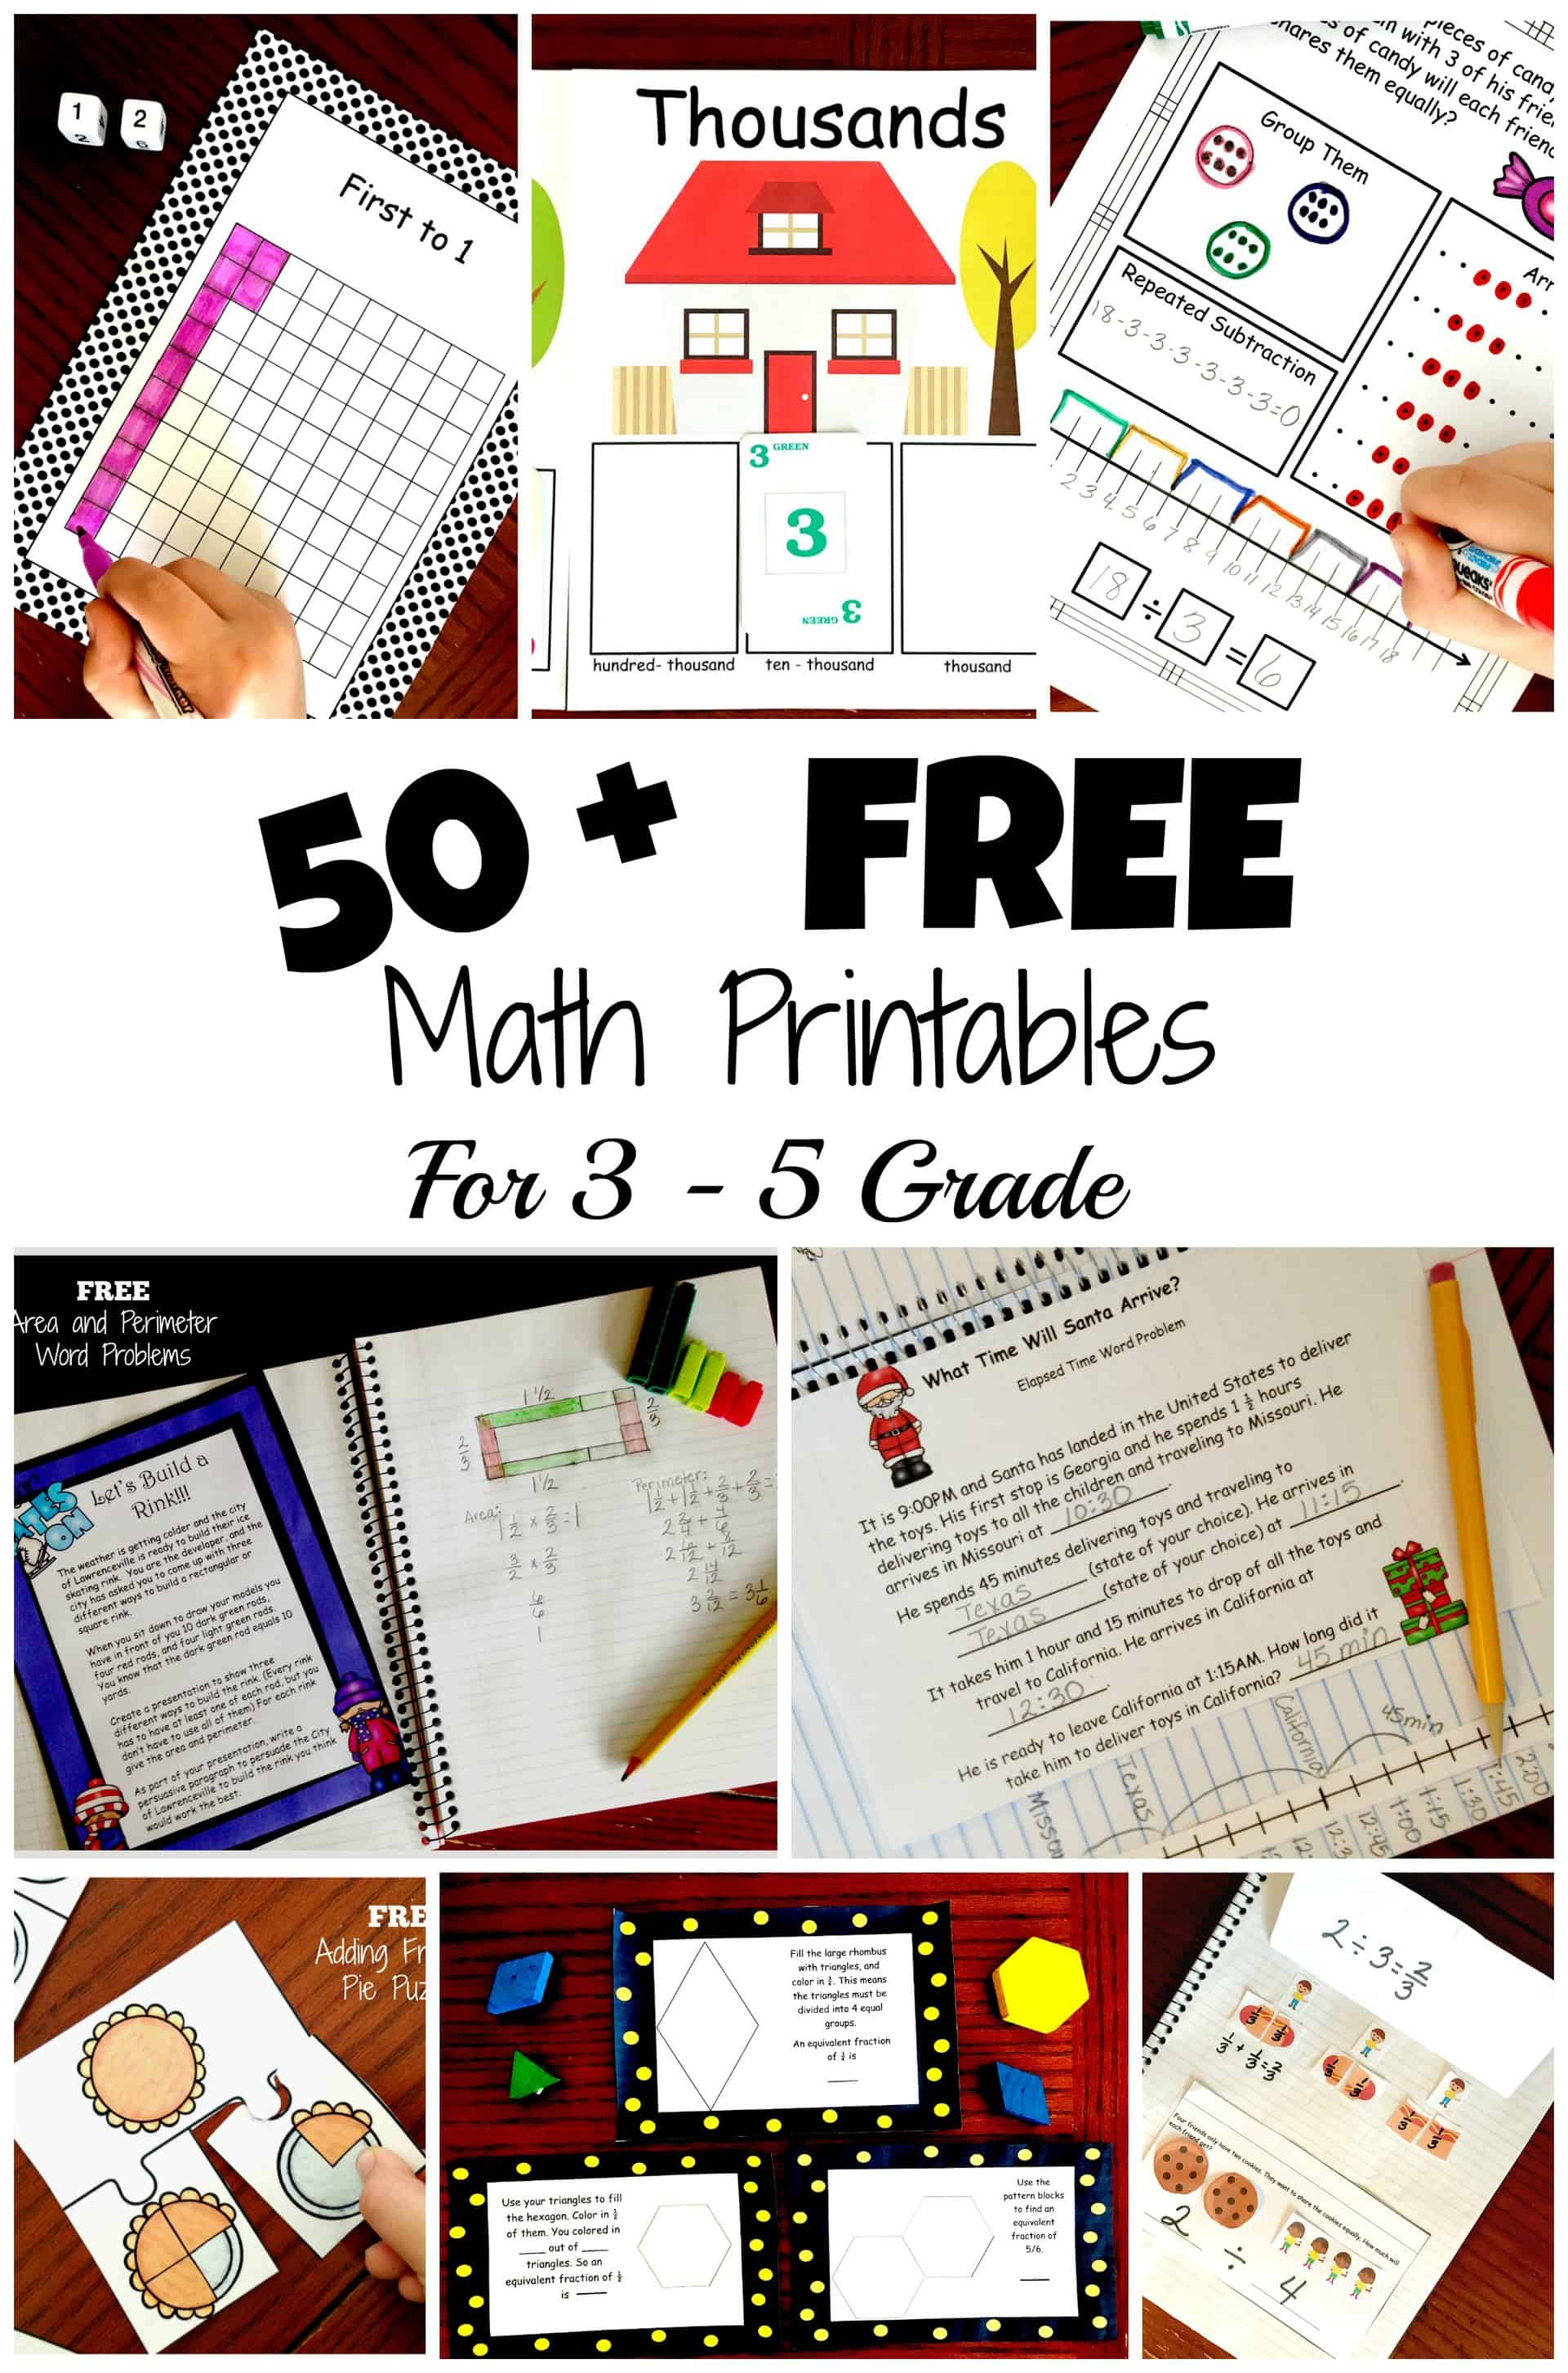 50 Awesome and Fun Math Activities for 3rd, 4th, and 5th Grade Students